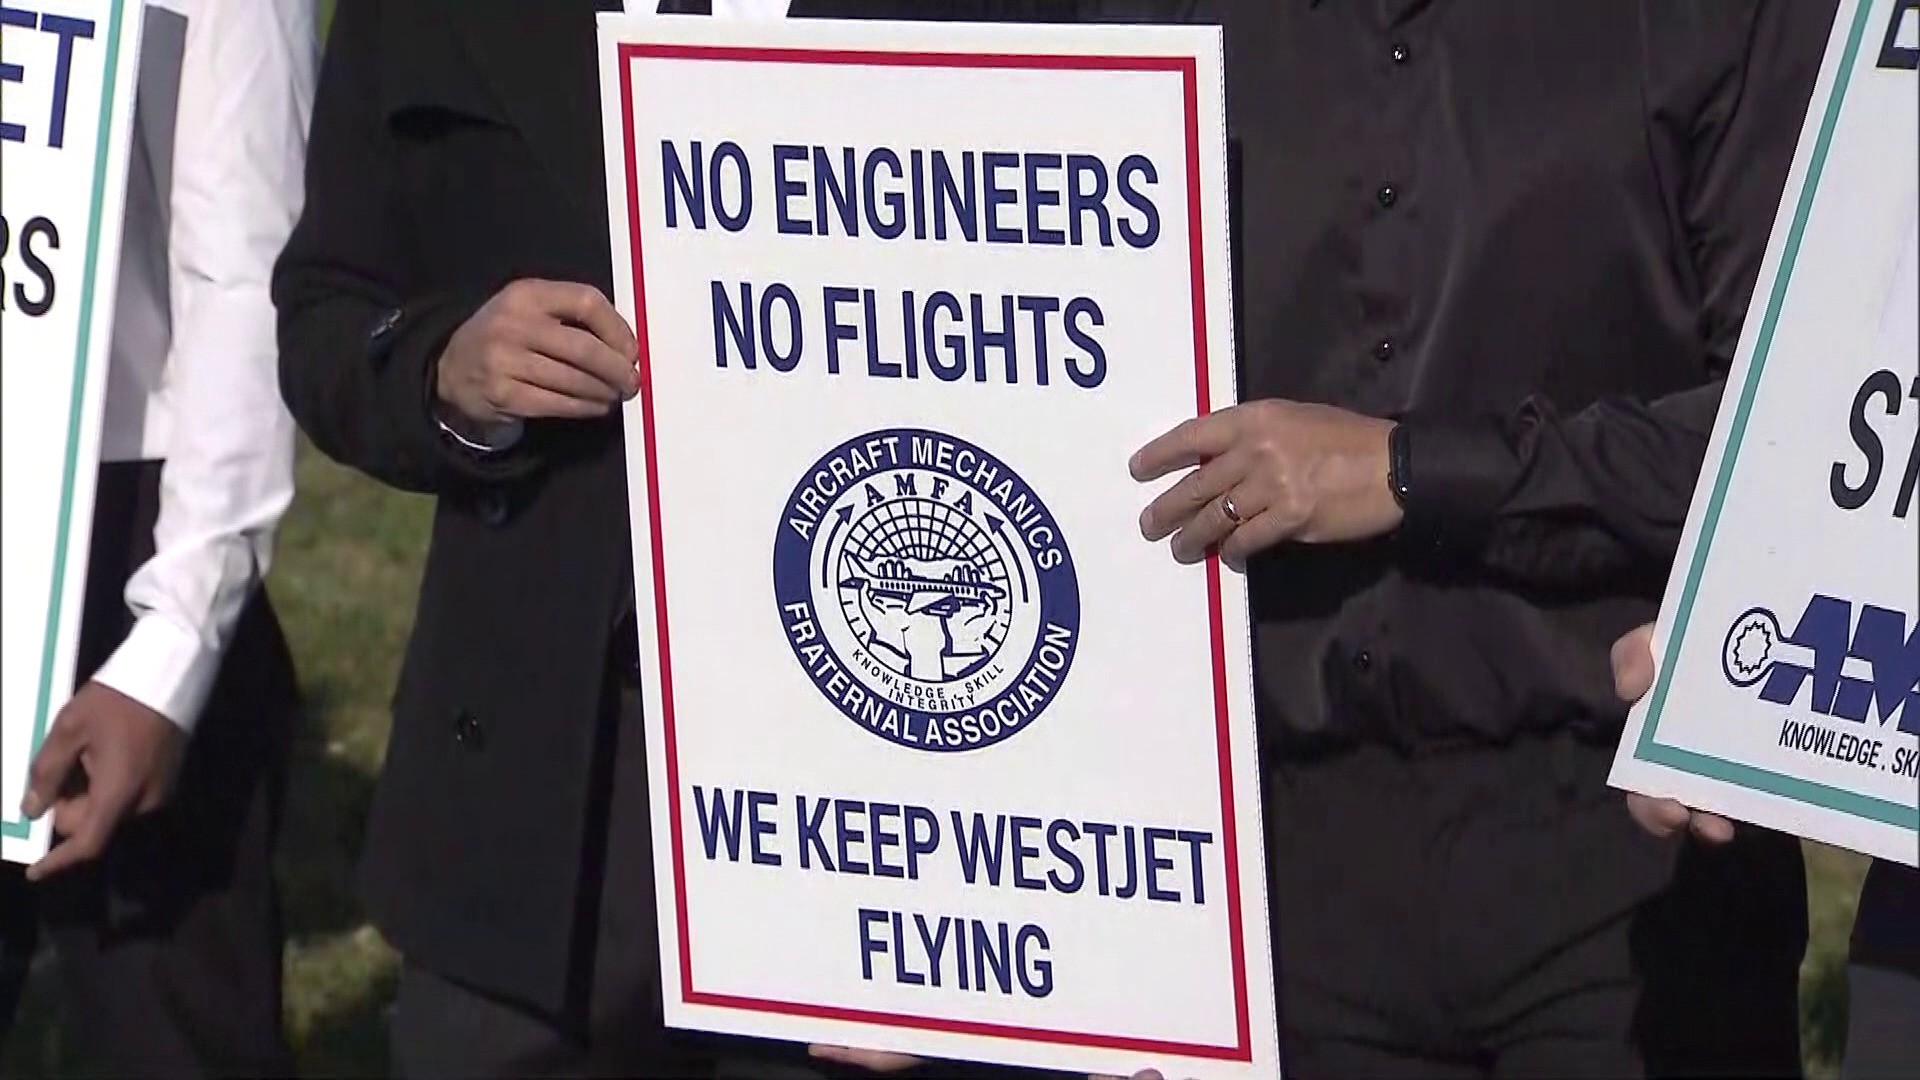 WestJet CEO: union “divorced from reality”